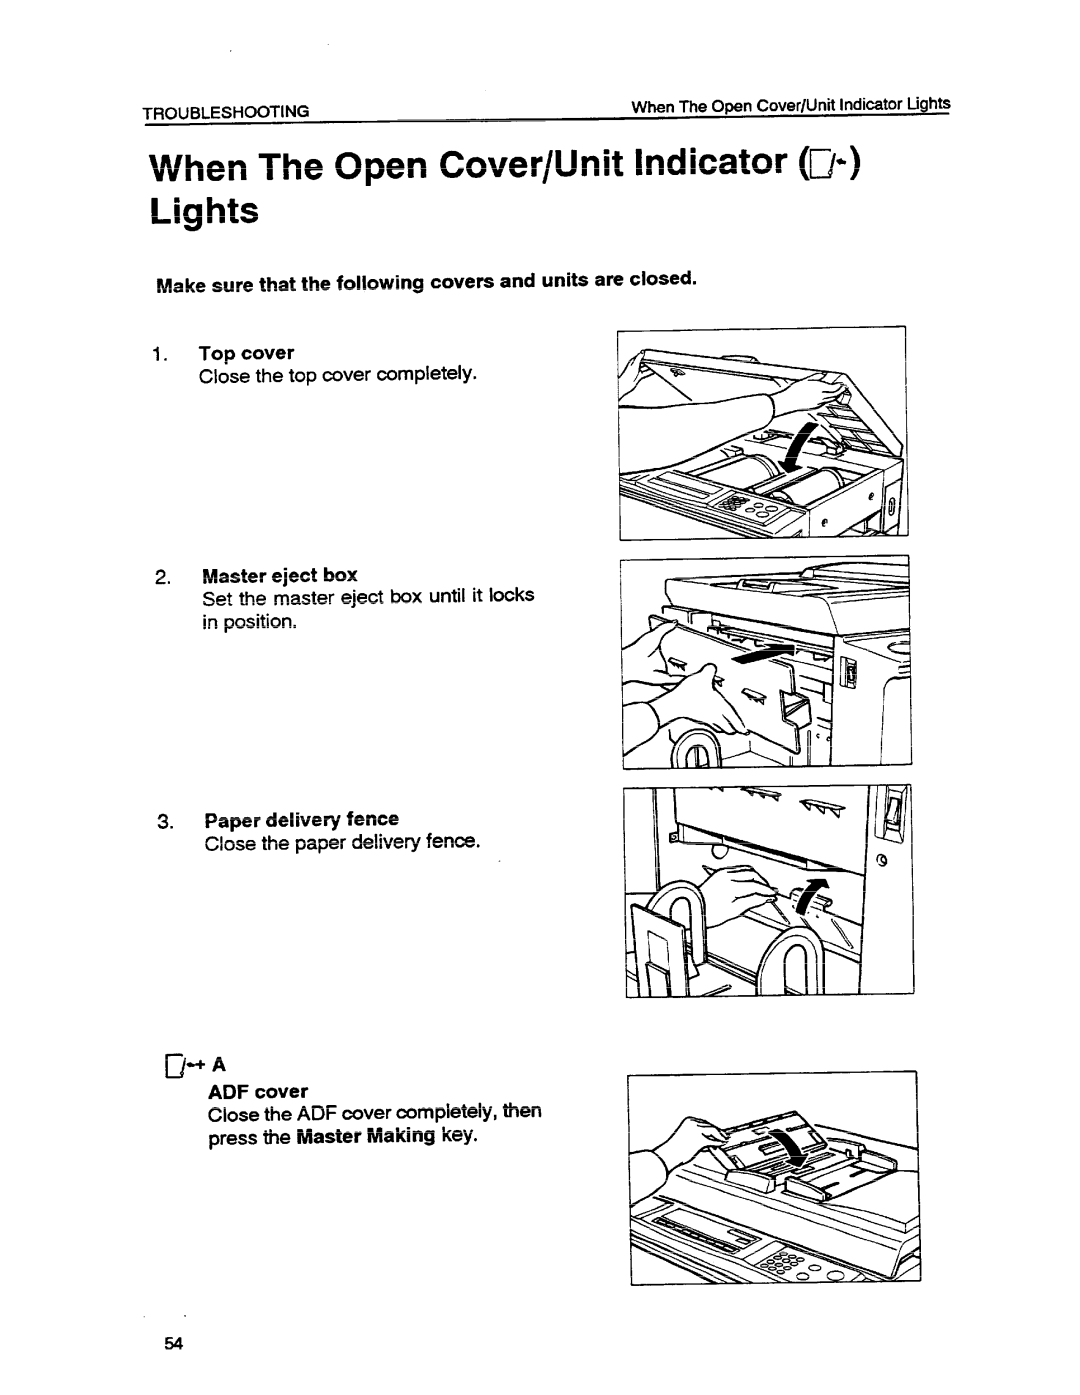 Ricoh VT1730 When The Open Cover/Unit Indicator ~, Lights, Make sure that the following covers and units are 1. Top cover 